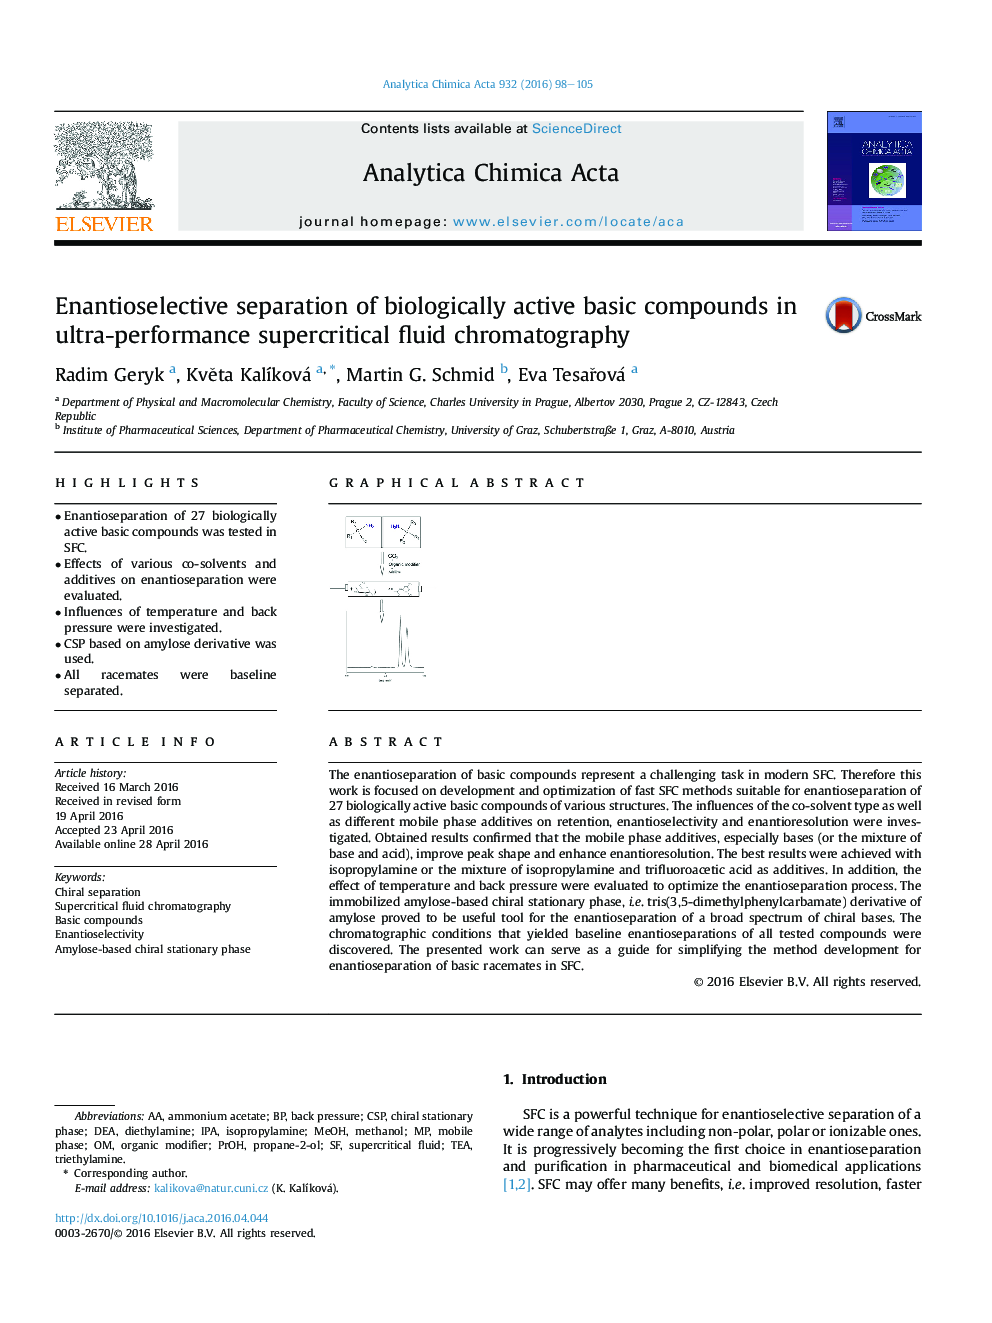 Enantioselective separation of biologically active basic compounds in ultra-performance supercritical fluid chromatography